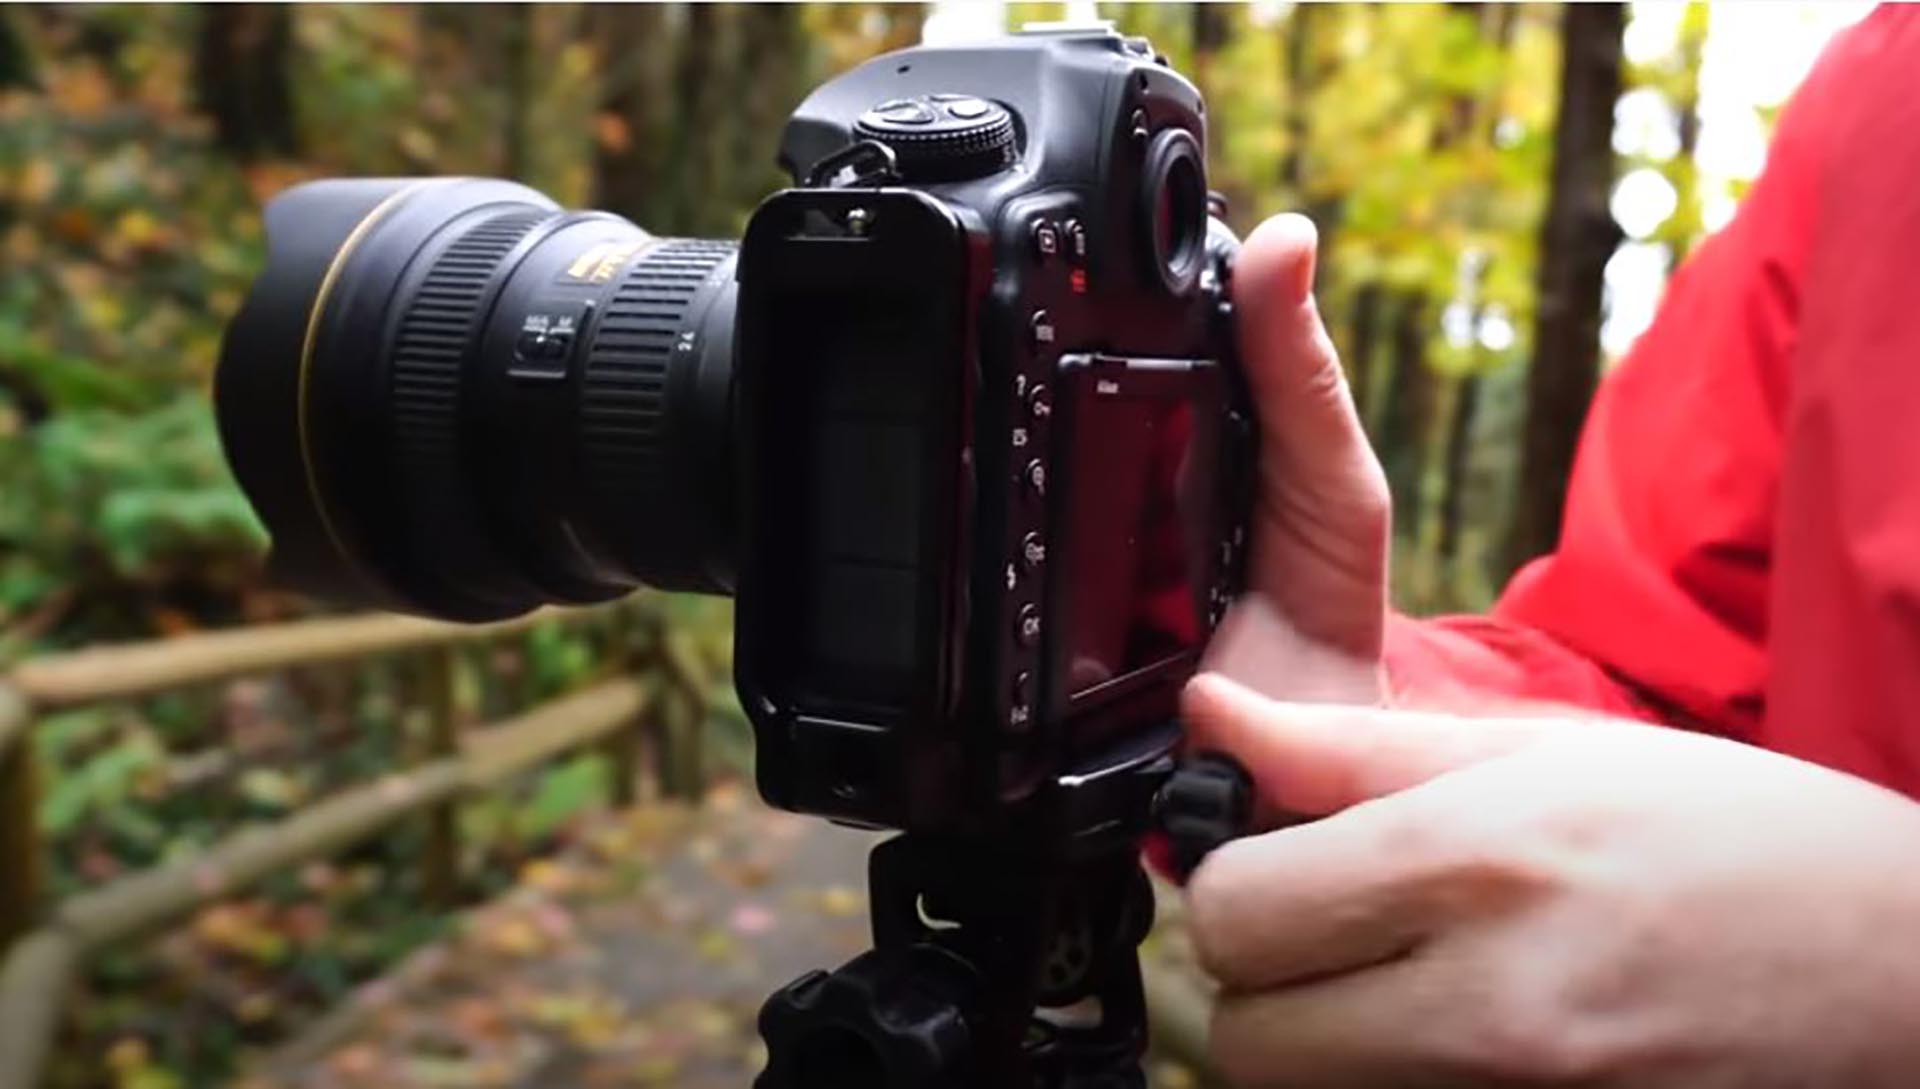 Nikon D850 - hands-on with Nikon's best all-round camera yet